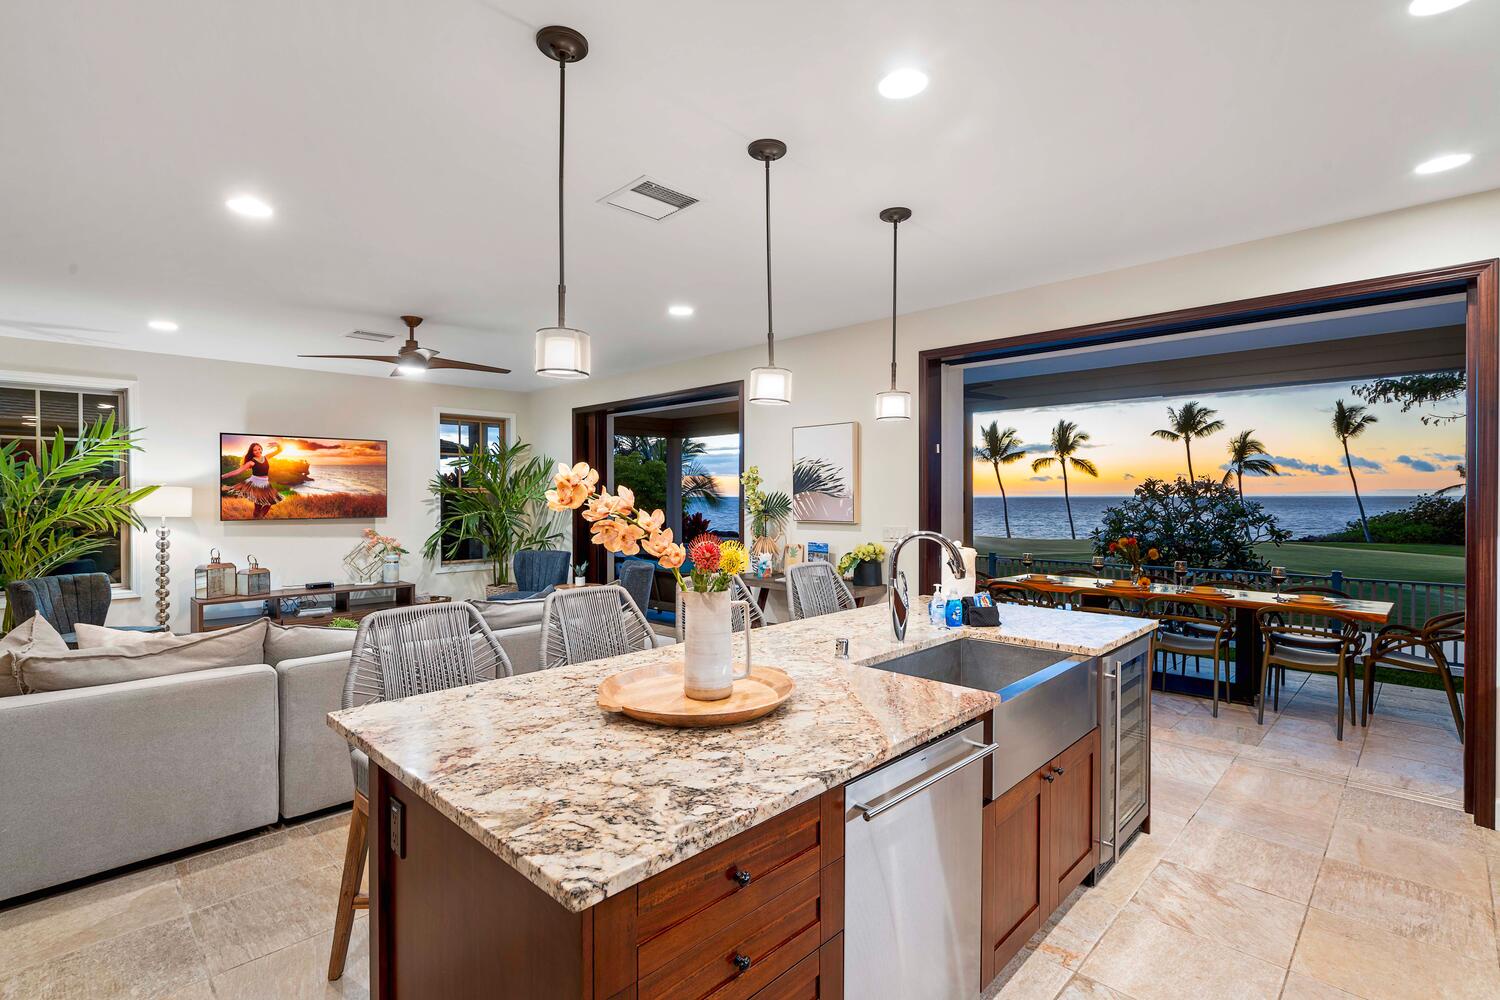 Kailua-Kona Vacation Rentals, Holua Kai #26 - Modern kitchen with an island and a view of the sunset over the ocean.